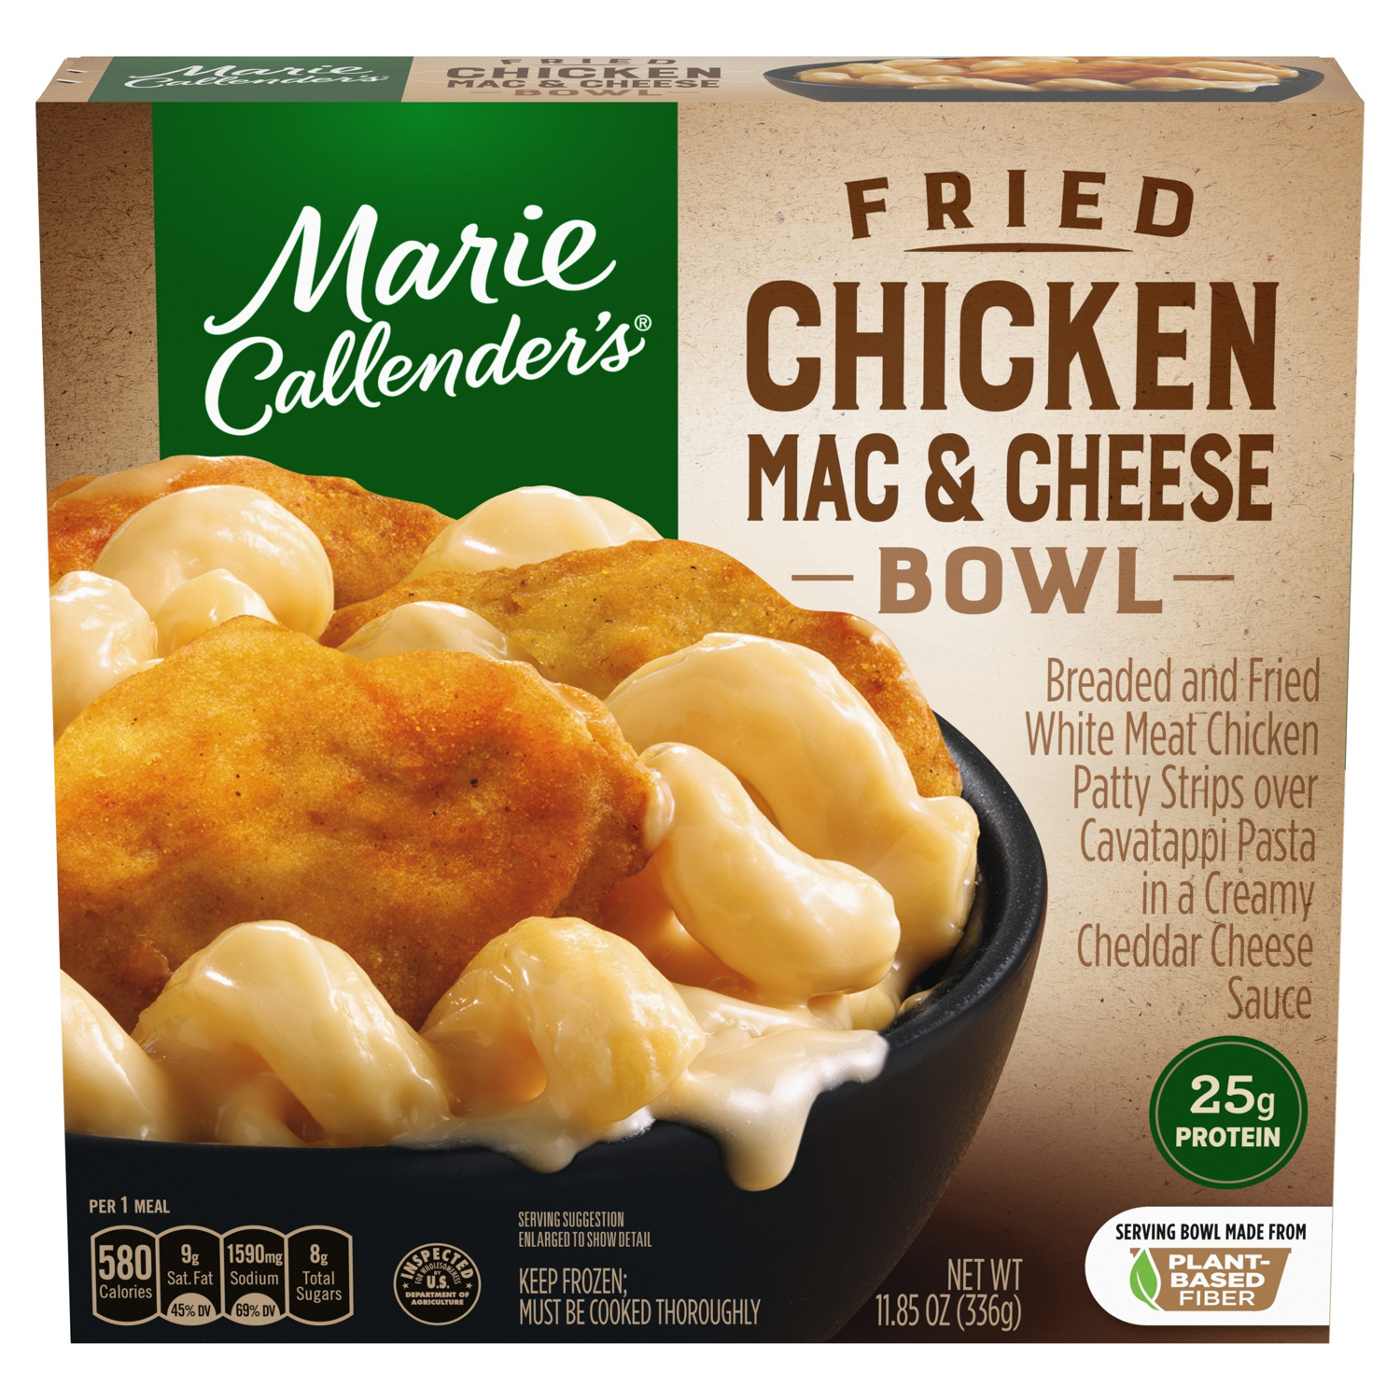 Marie Callender's Fried Chicken Mac & Cheese Bowl Frozen Meal; image 1 of 7